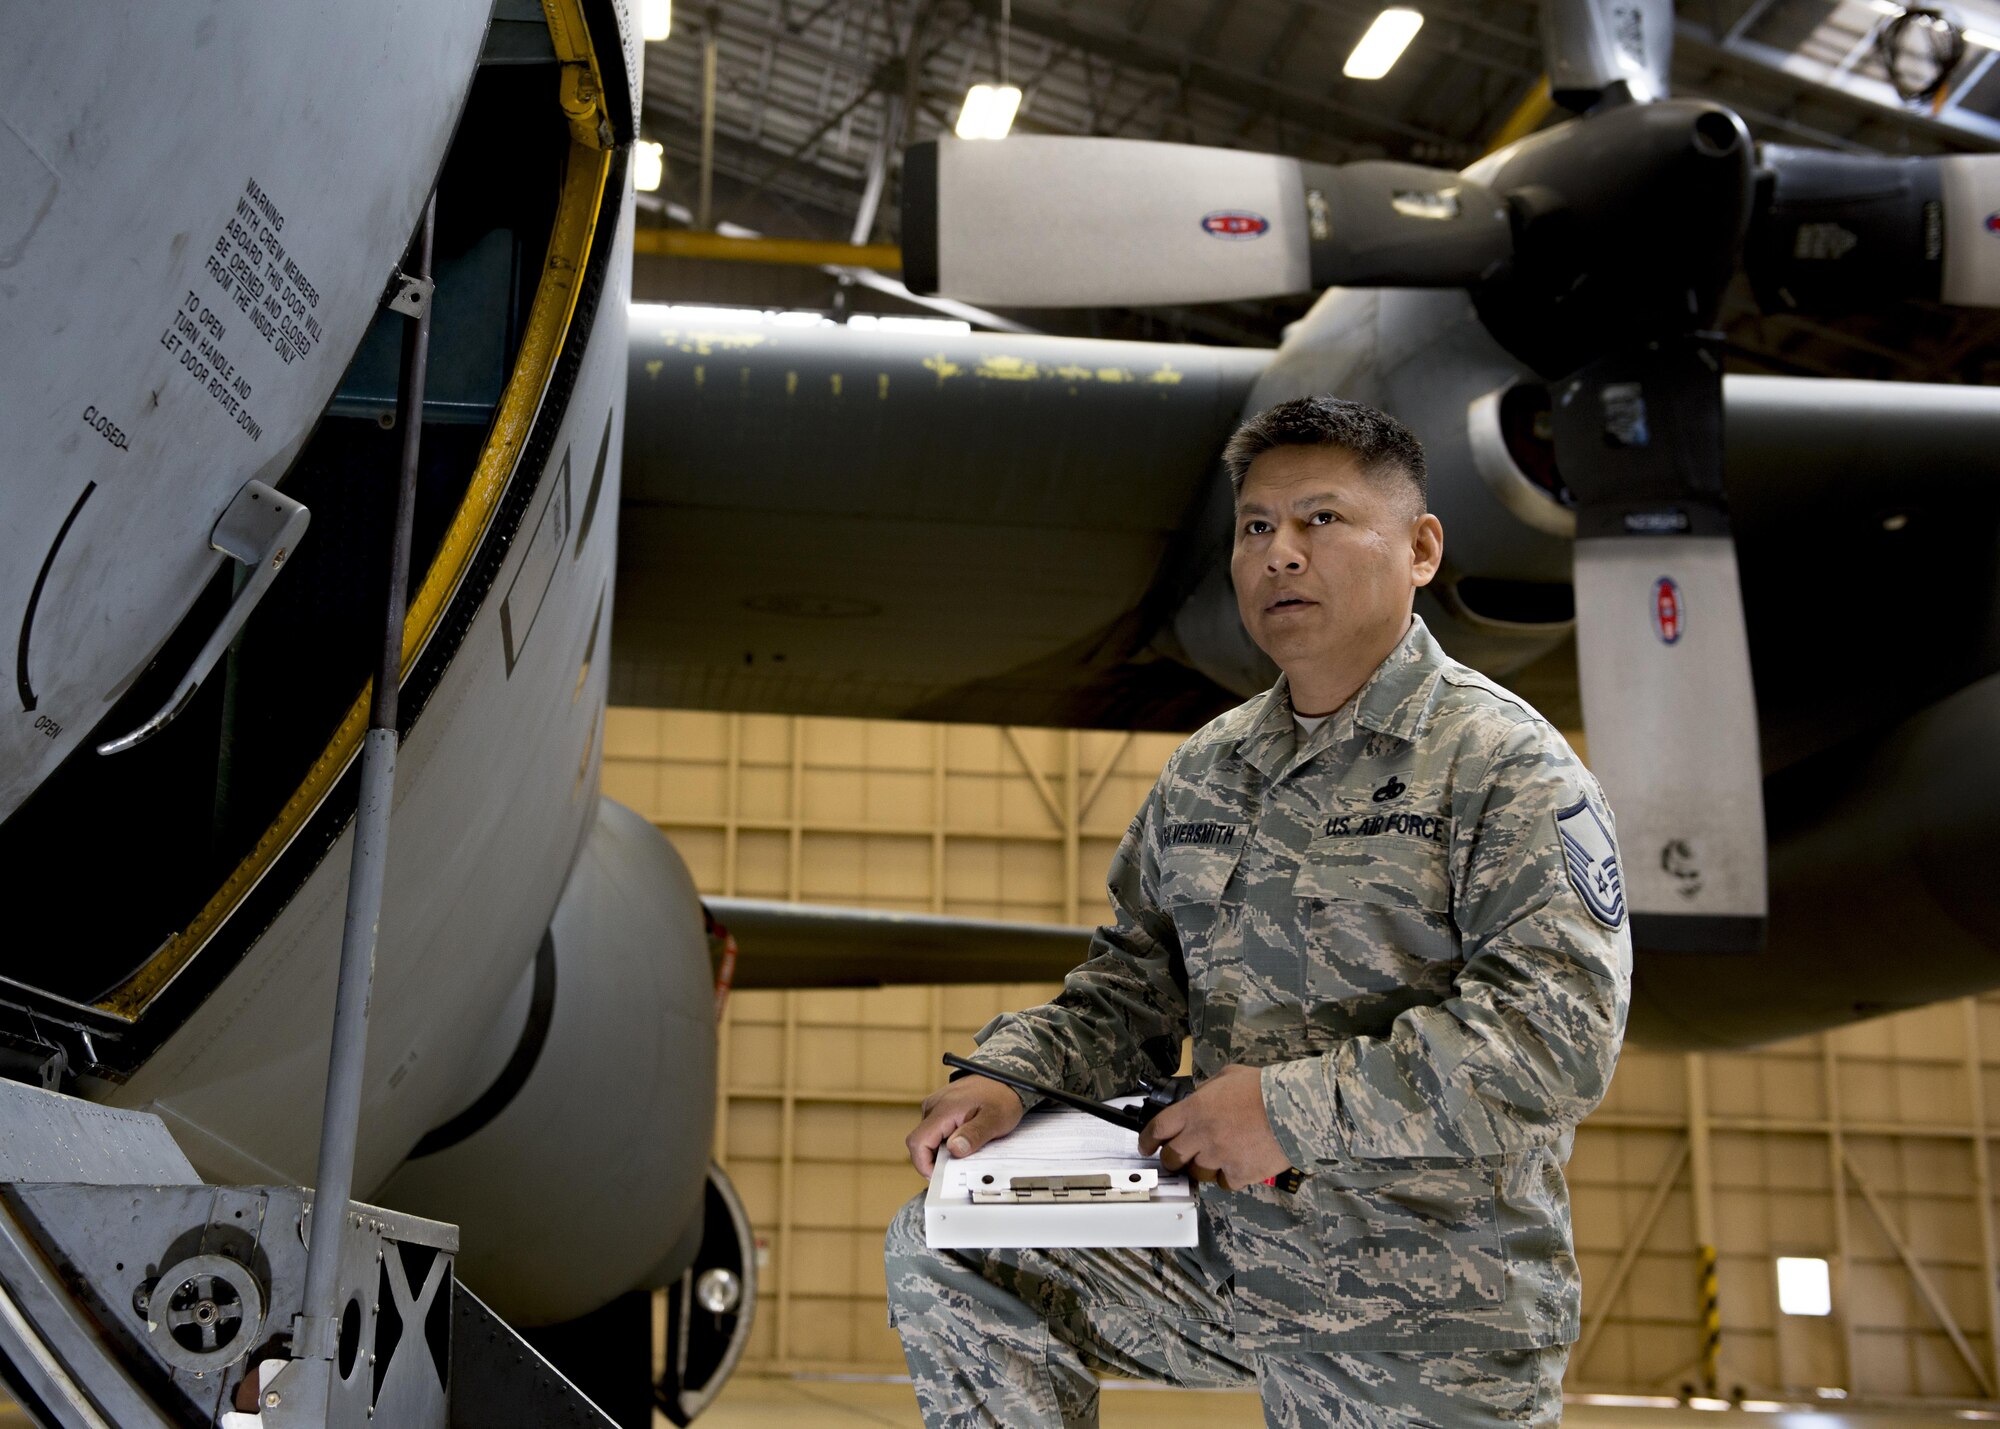 Master Sgt. Edward M. Silversmith, 374th Maintenance Squadron flight chief, waits to preform maintenance checks to C-130 Hercules on Dec. 10, 2016, at Yokota Air Base, Japan. As a squadron flight chief, Silversmith is responsible for the training, health and welfare for the Airmen in his squadron. (U.S. Air Force photo by Airman 1st Class Donald Hudson)